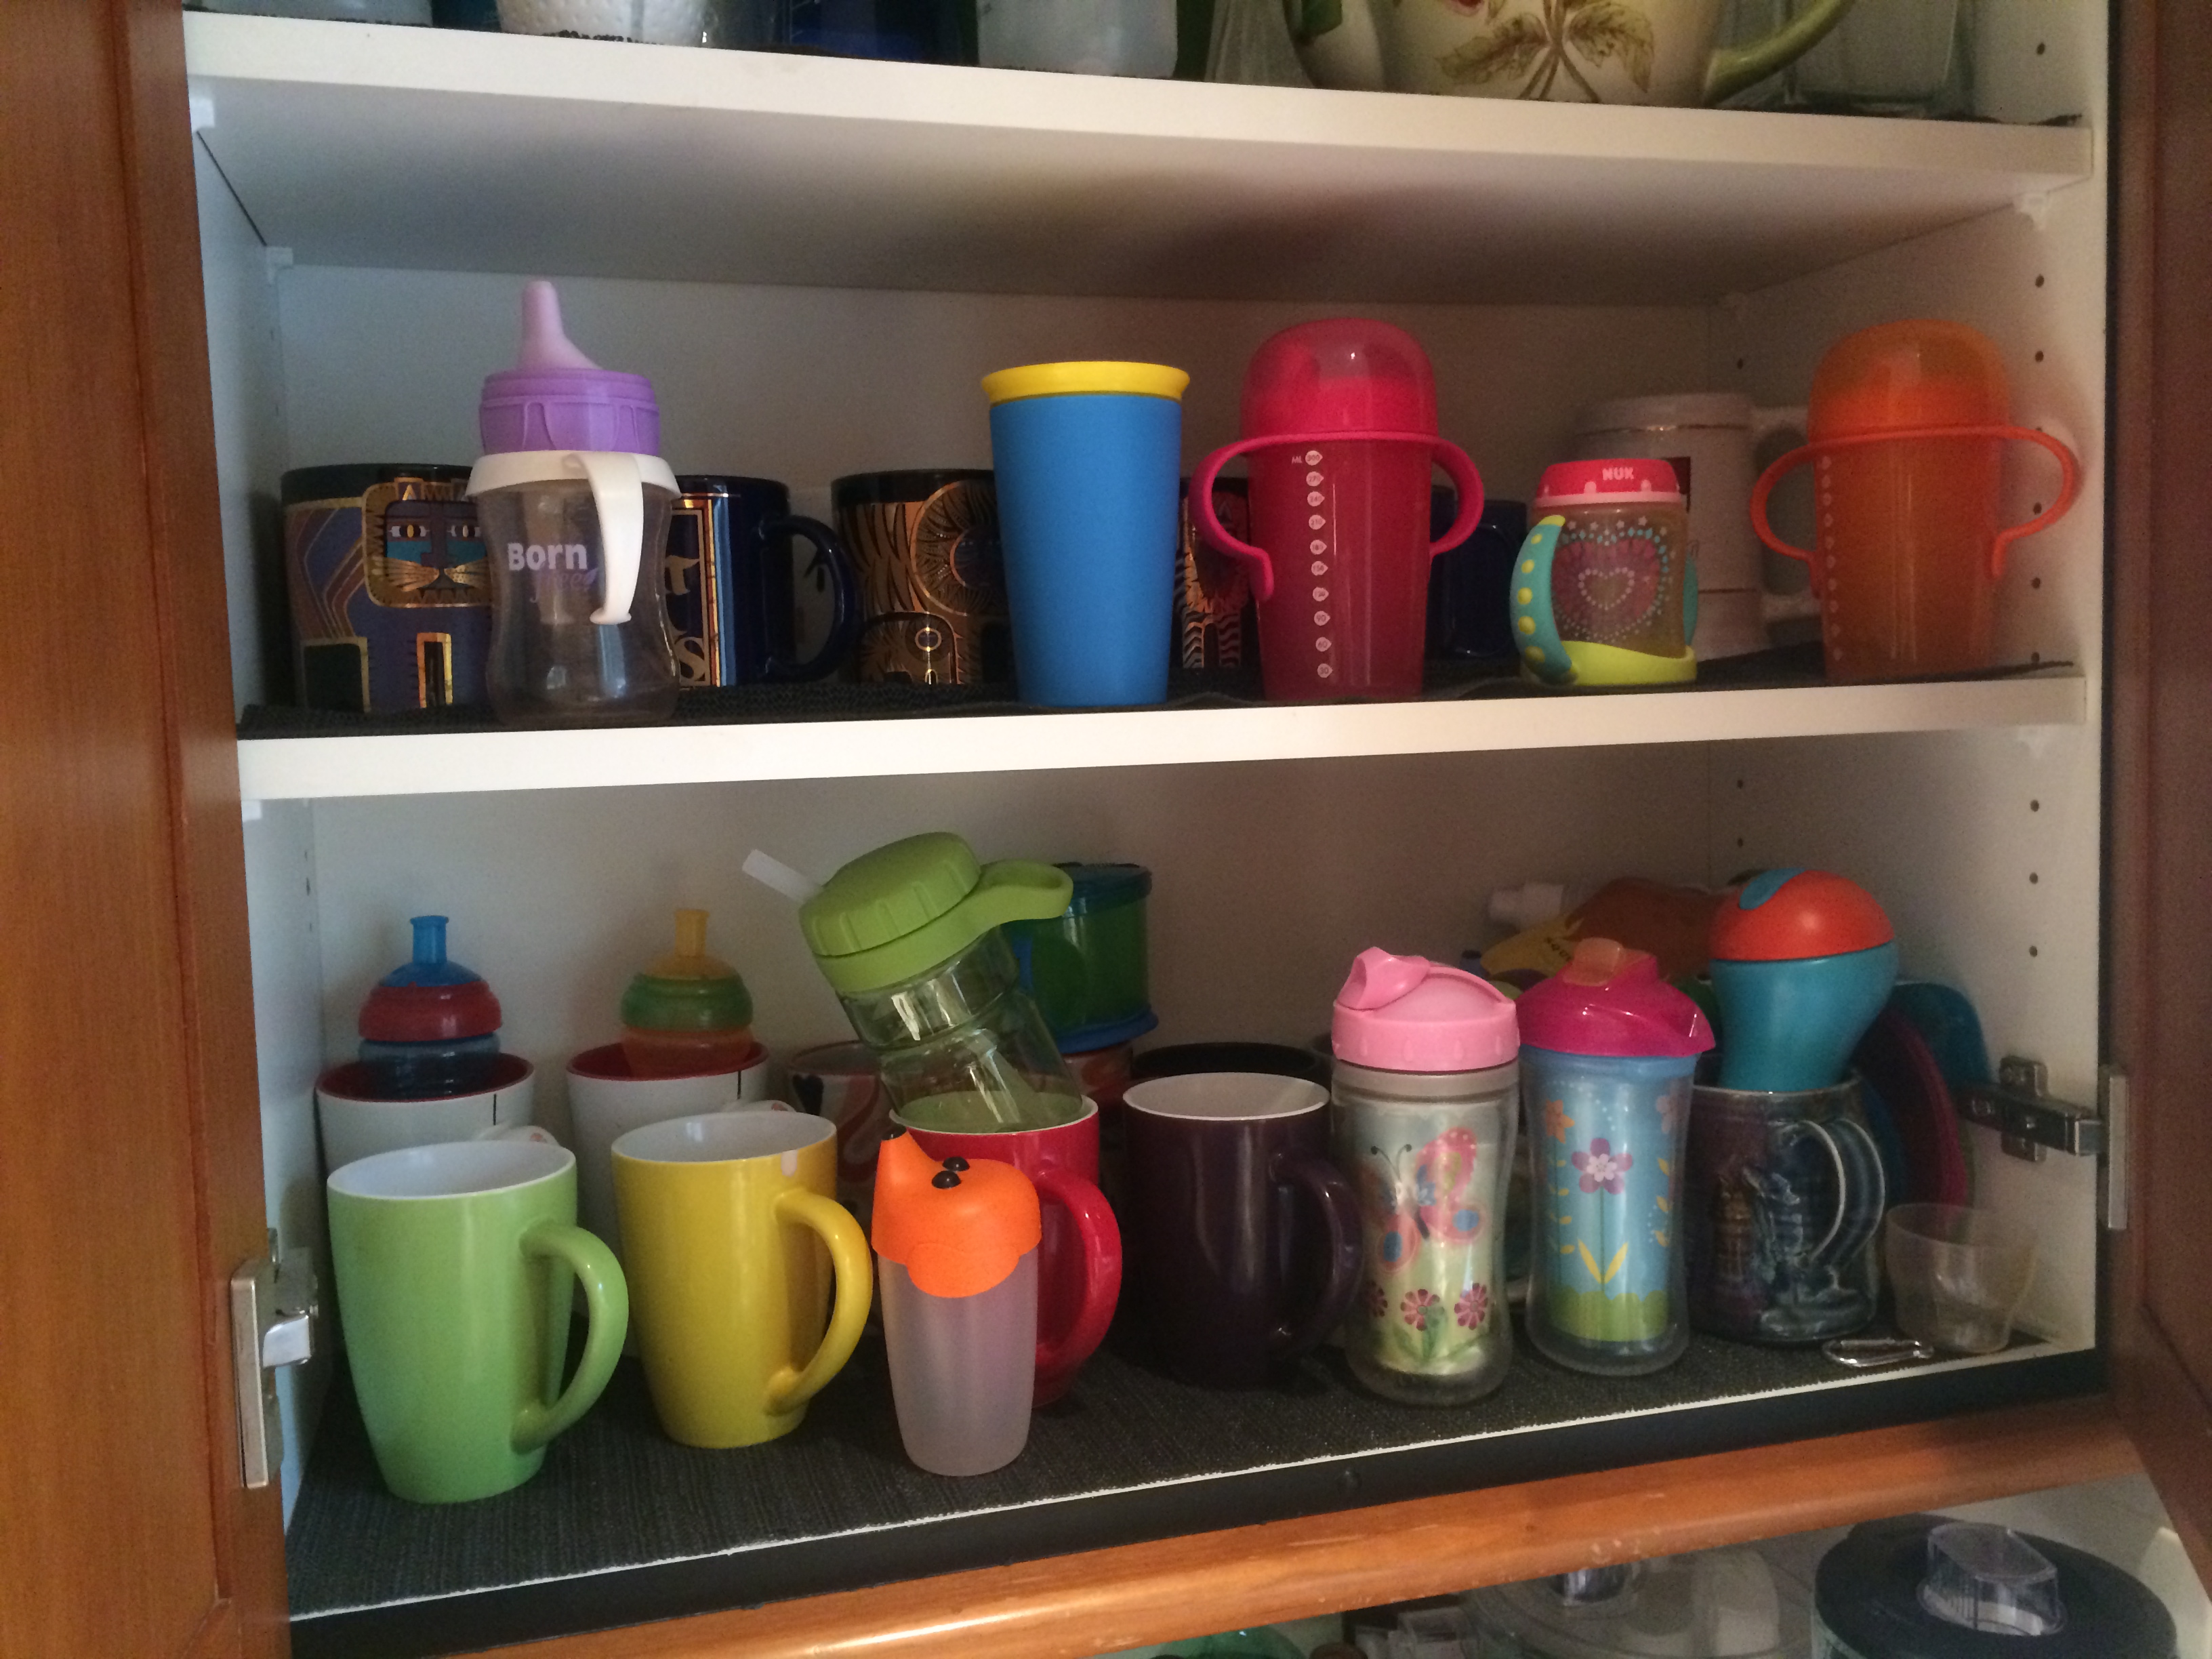 Top Sippy Cups & Straw Cups